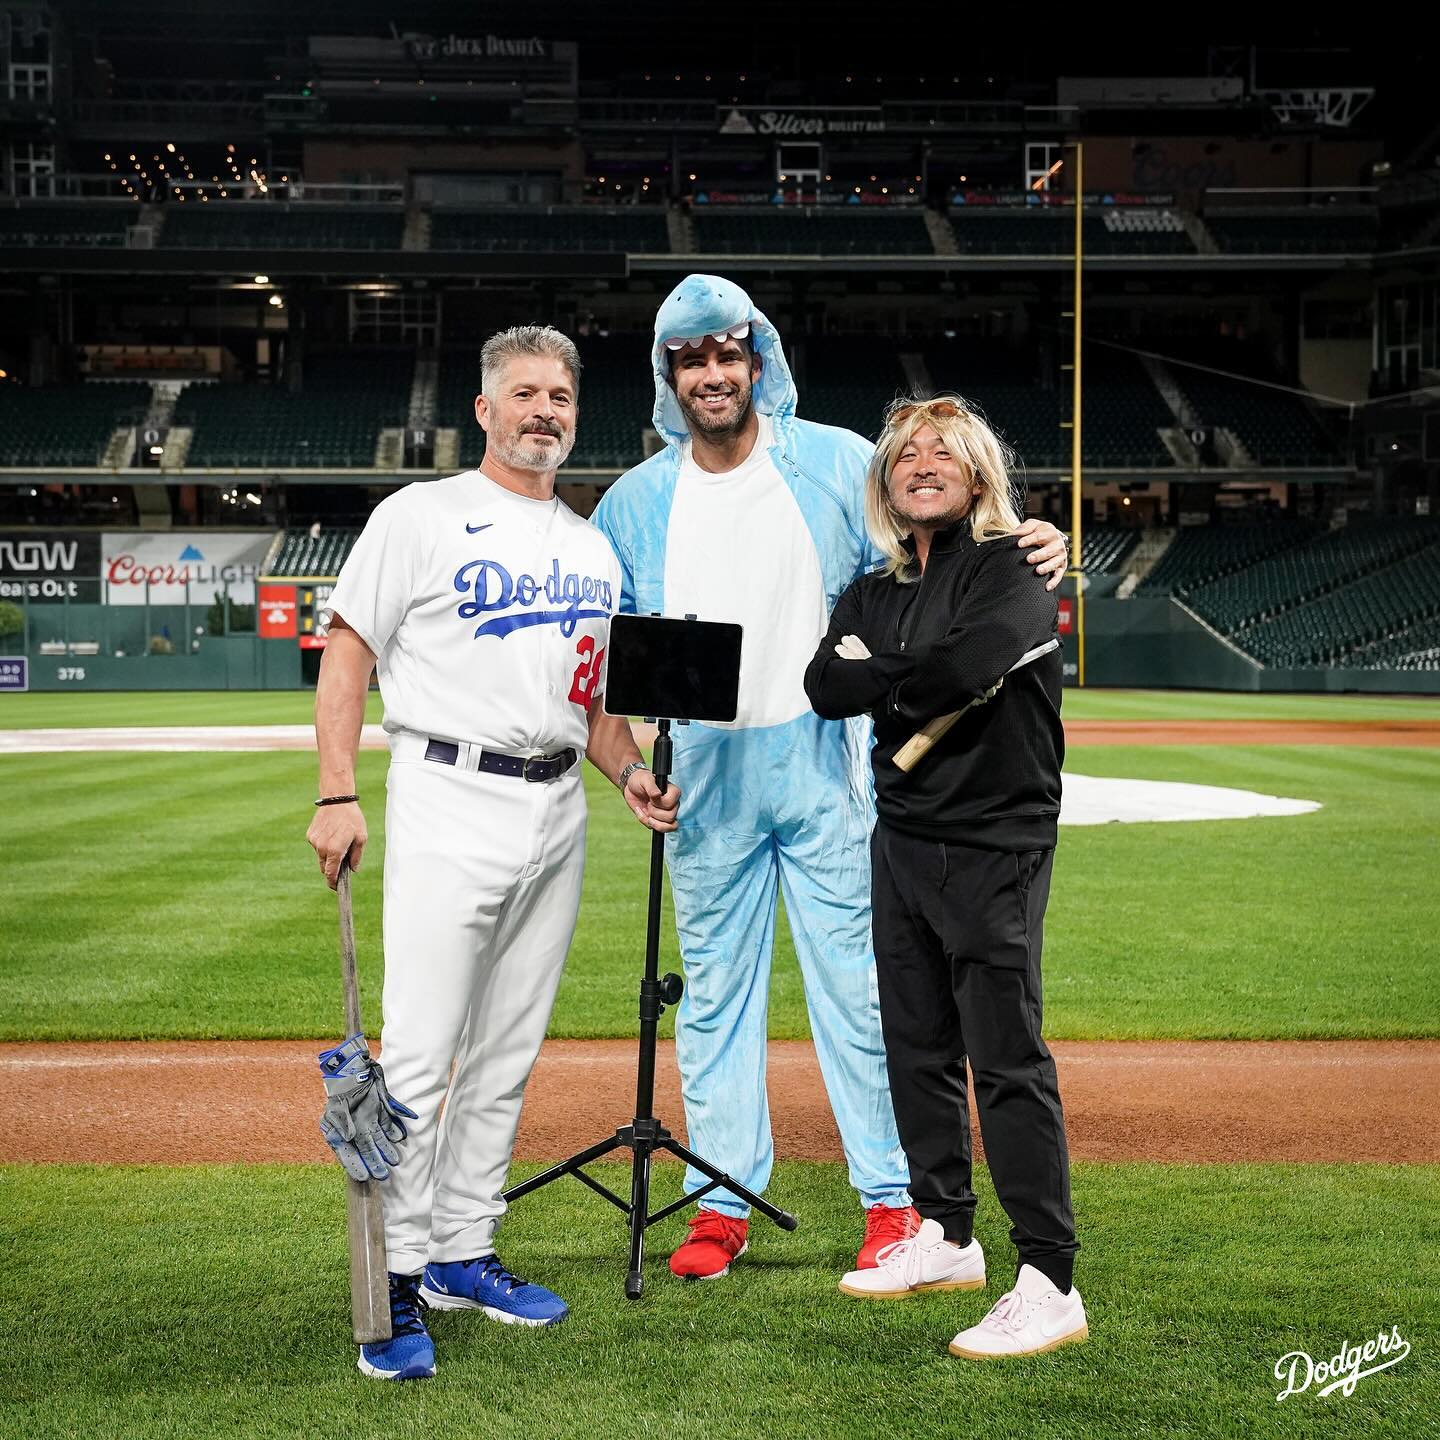 Dodgers Hold Annual Team Costume Dress Up Day for Flight to San Francisco